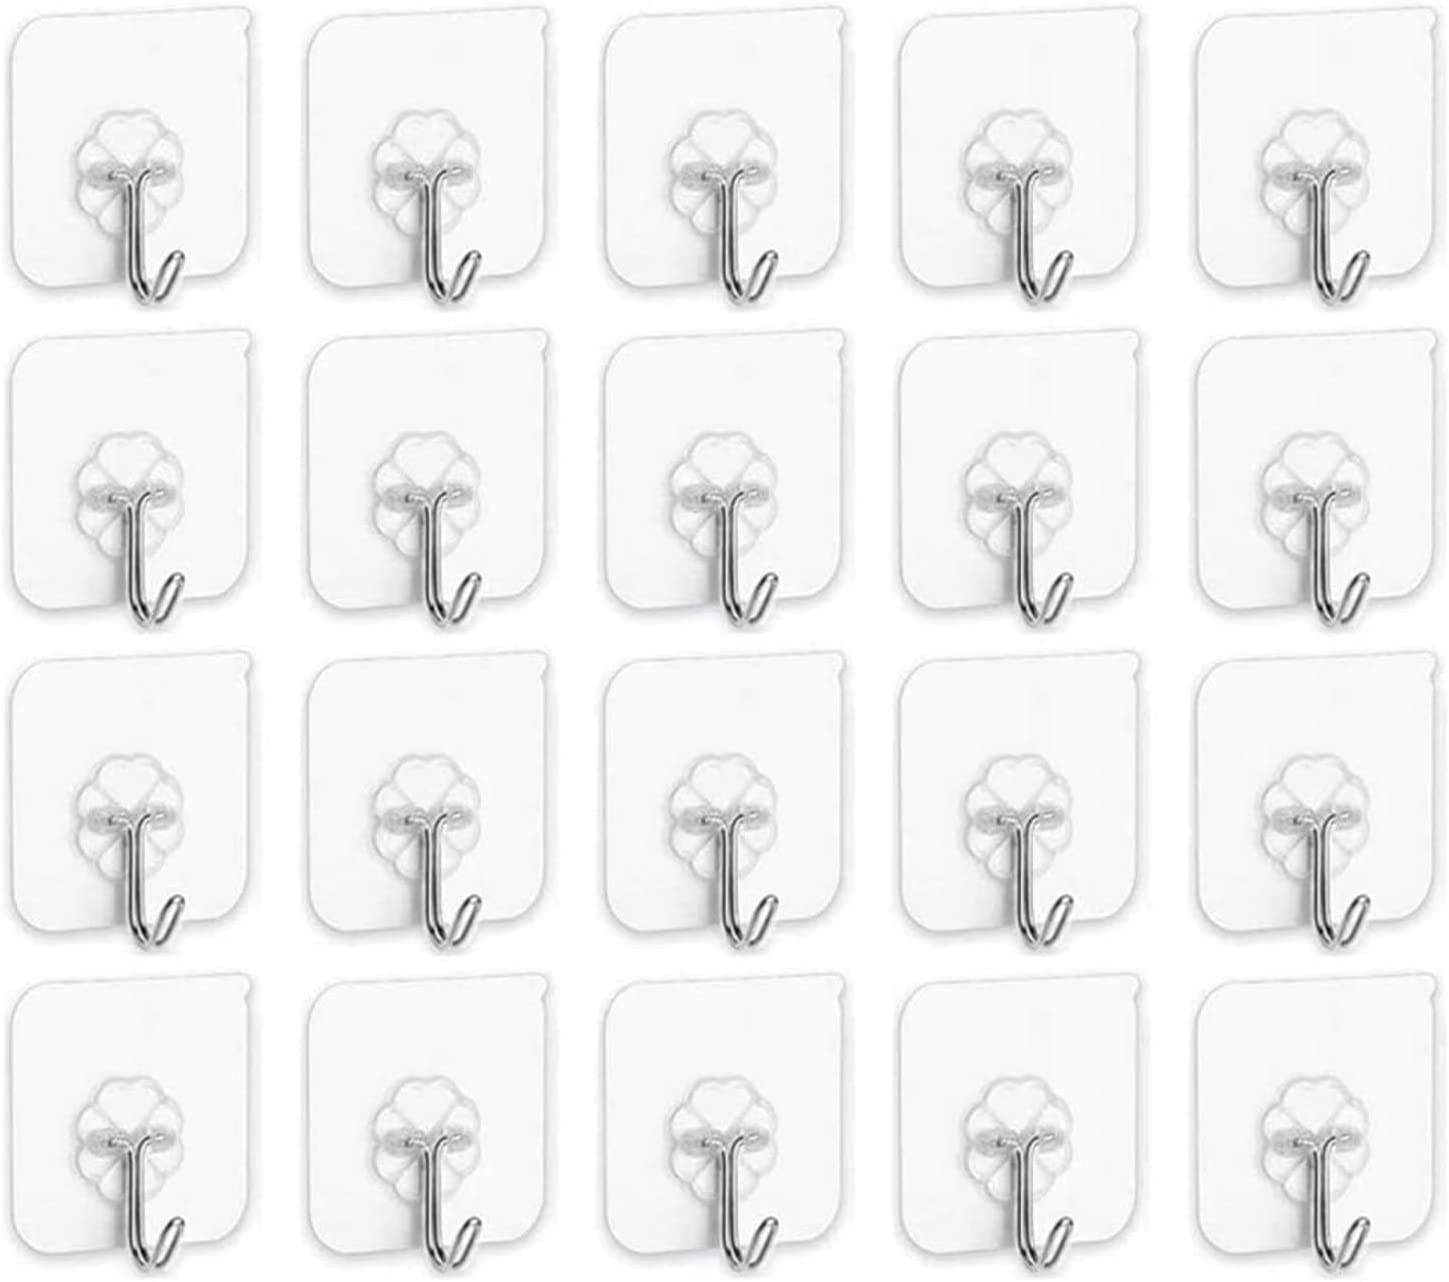 Hooks for Wall, 20 Pack Adhesive Wall Hooks for Wall Heavy Duty